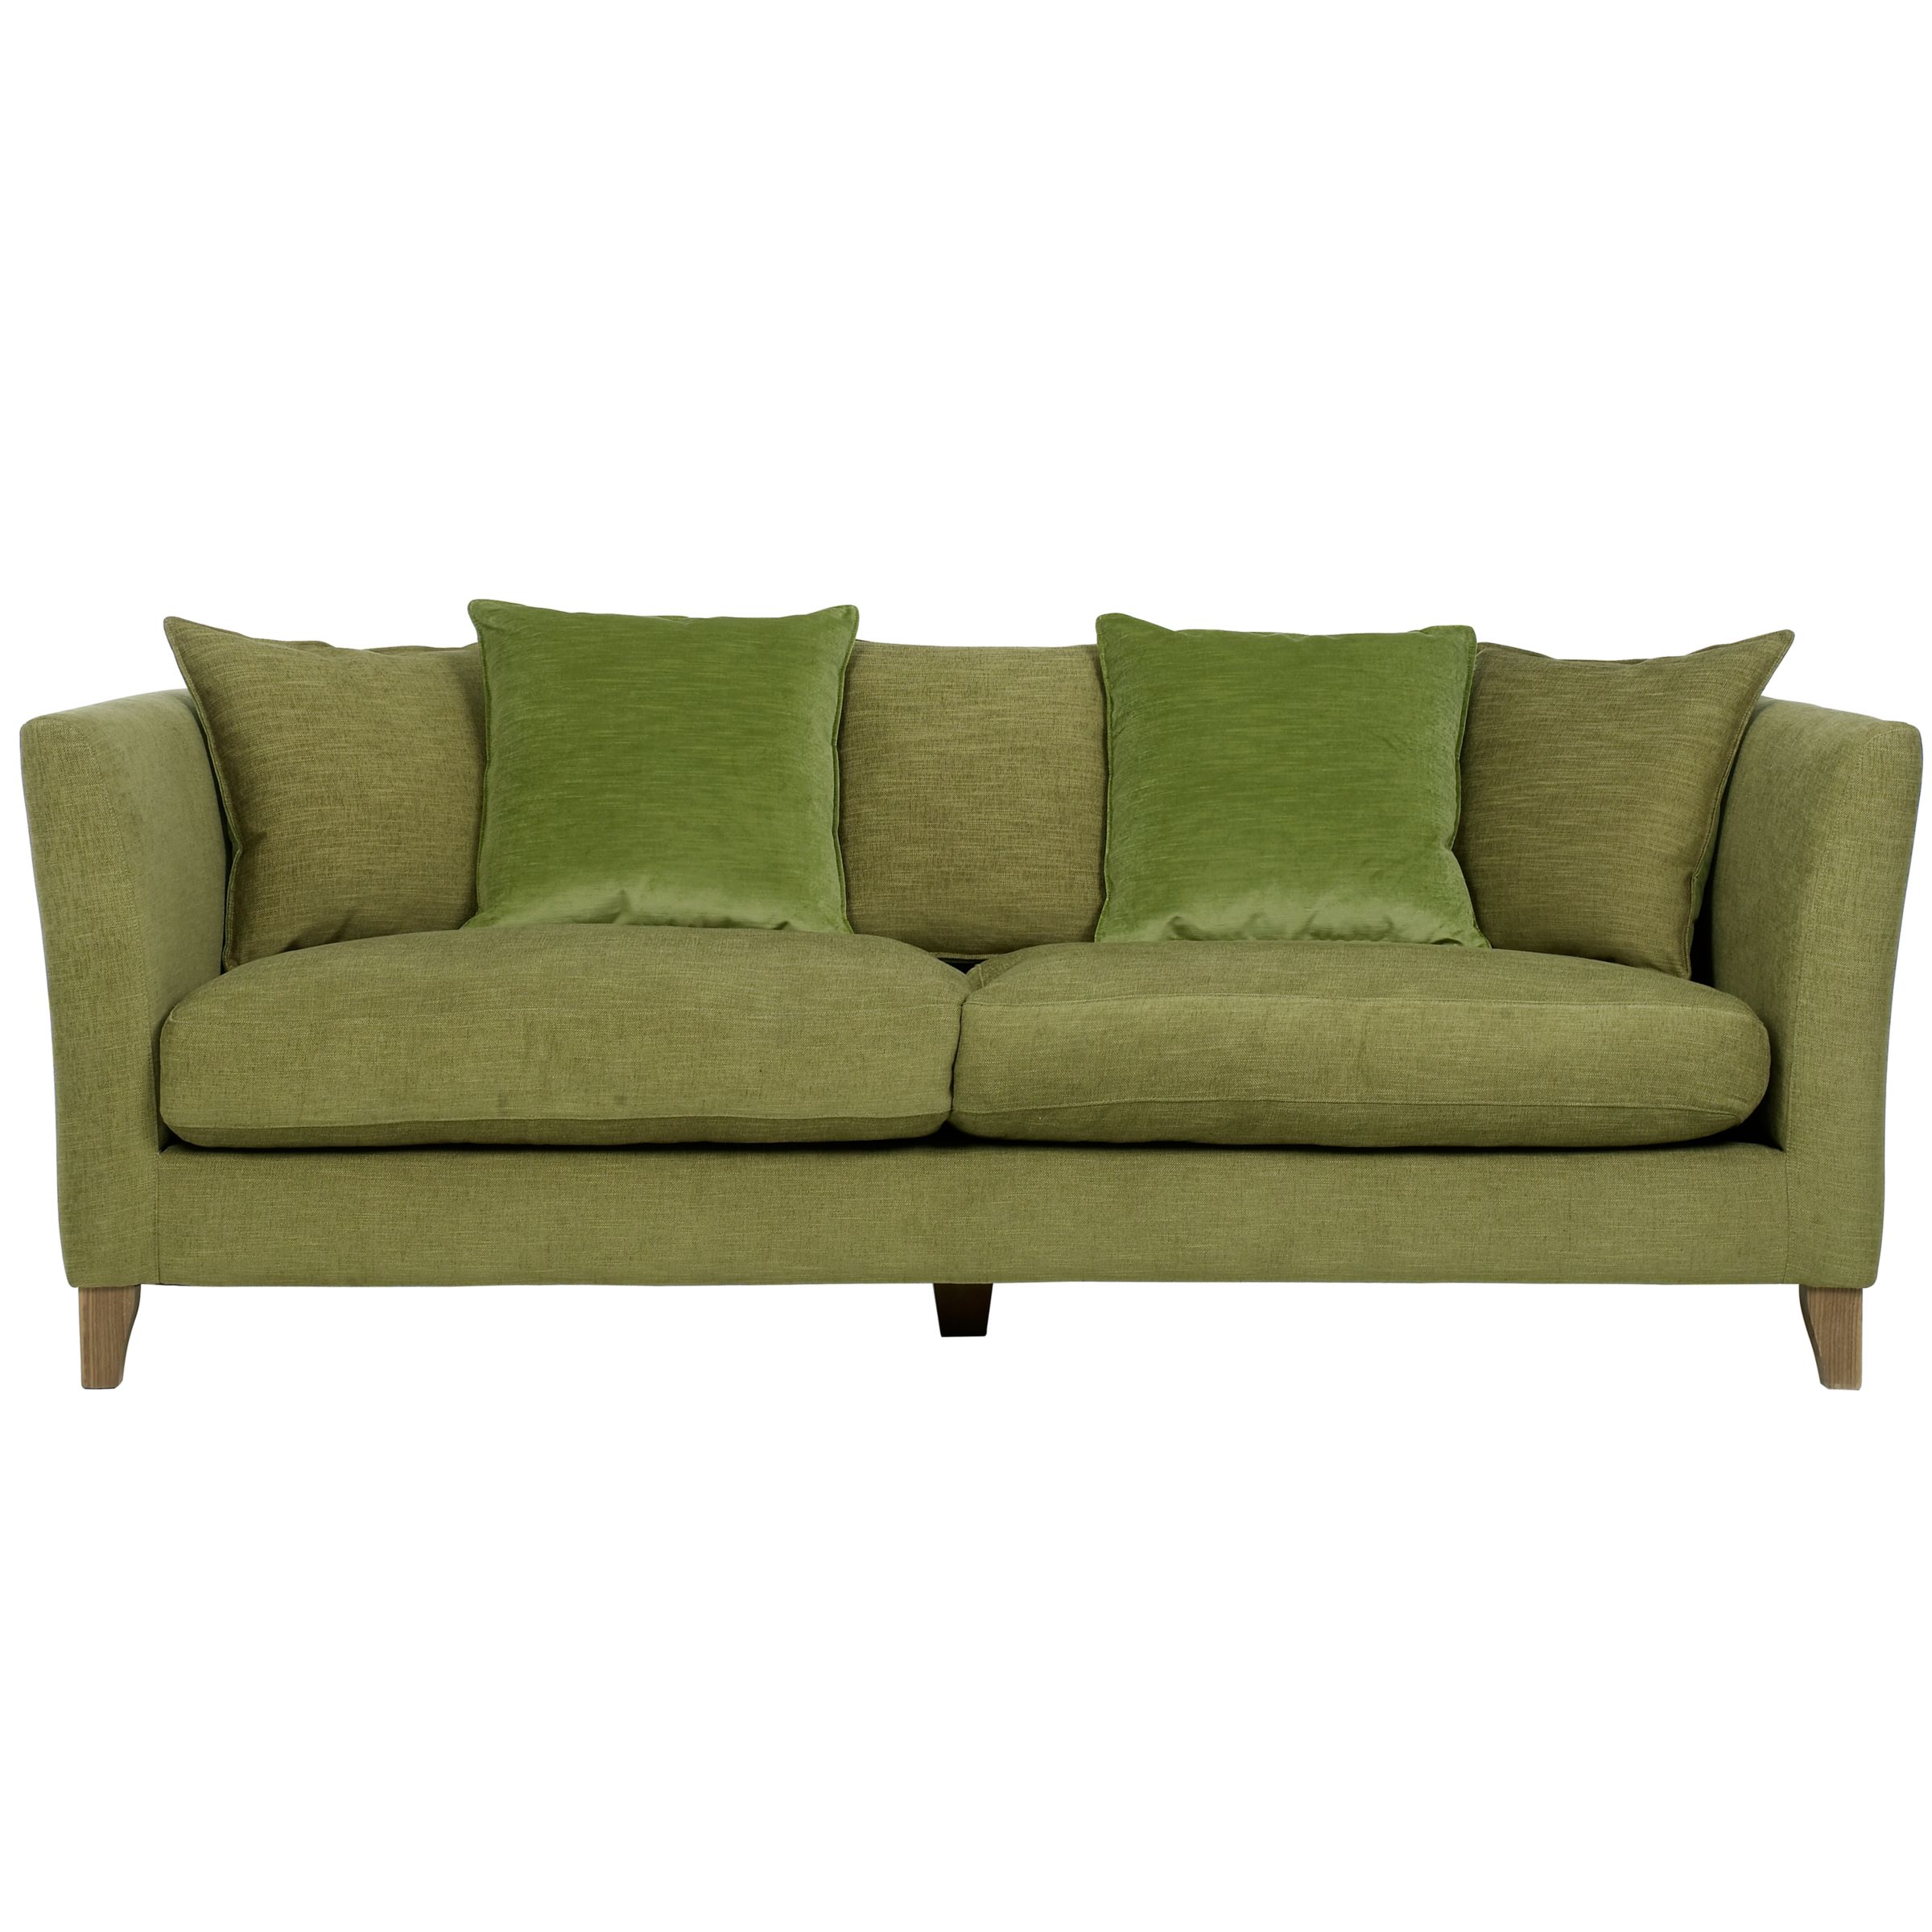 Nick Munro Collection Grand Sofa, Scatter Back,